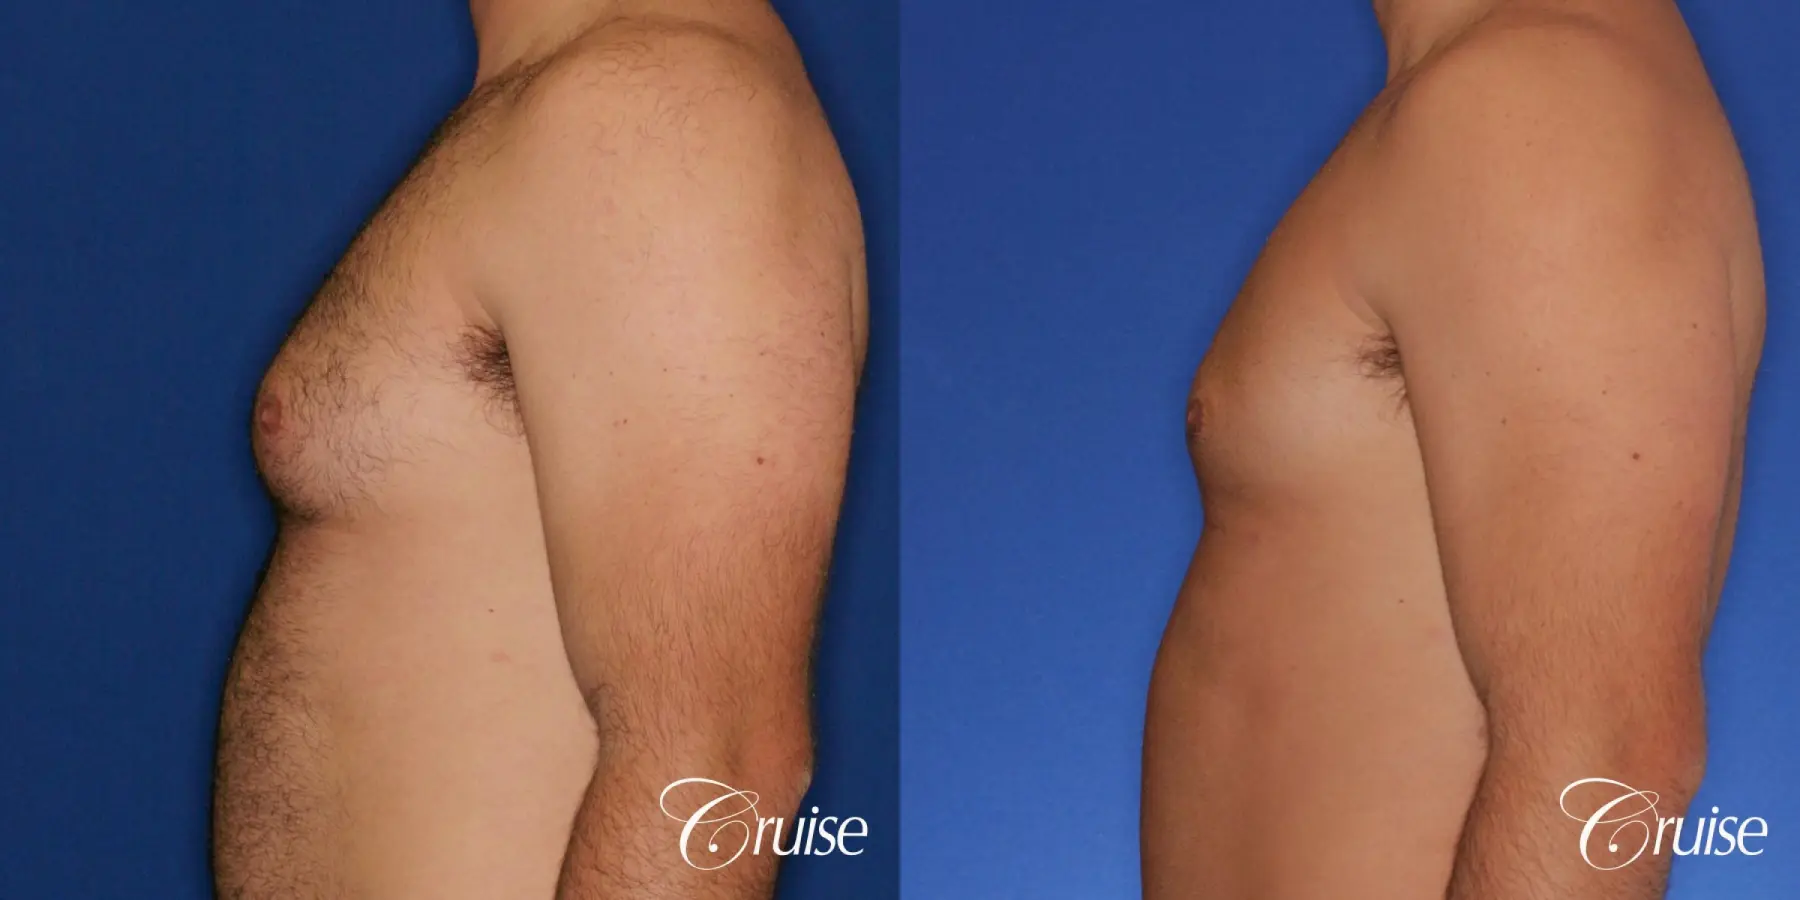 male patient has mild gynecomastia - Before and After 2